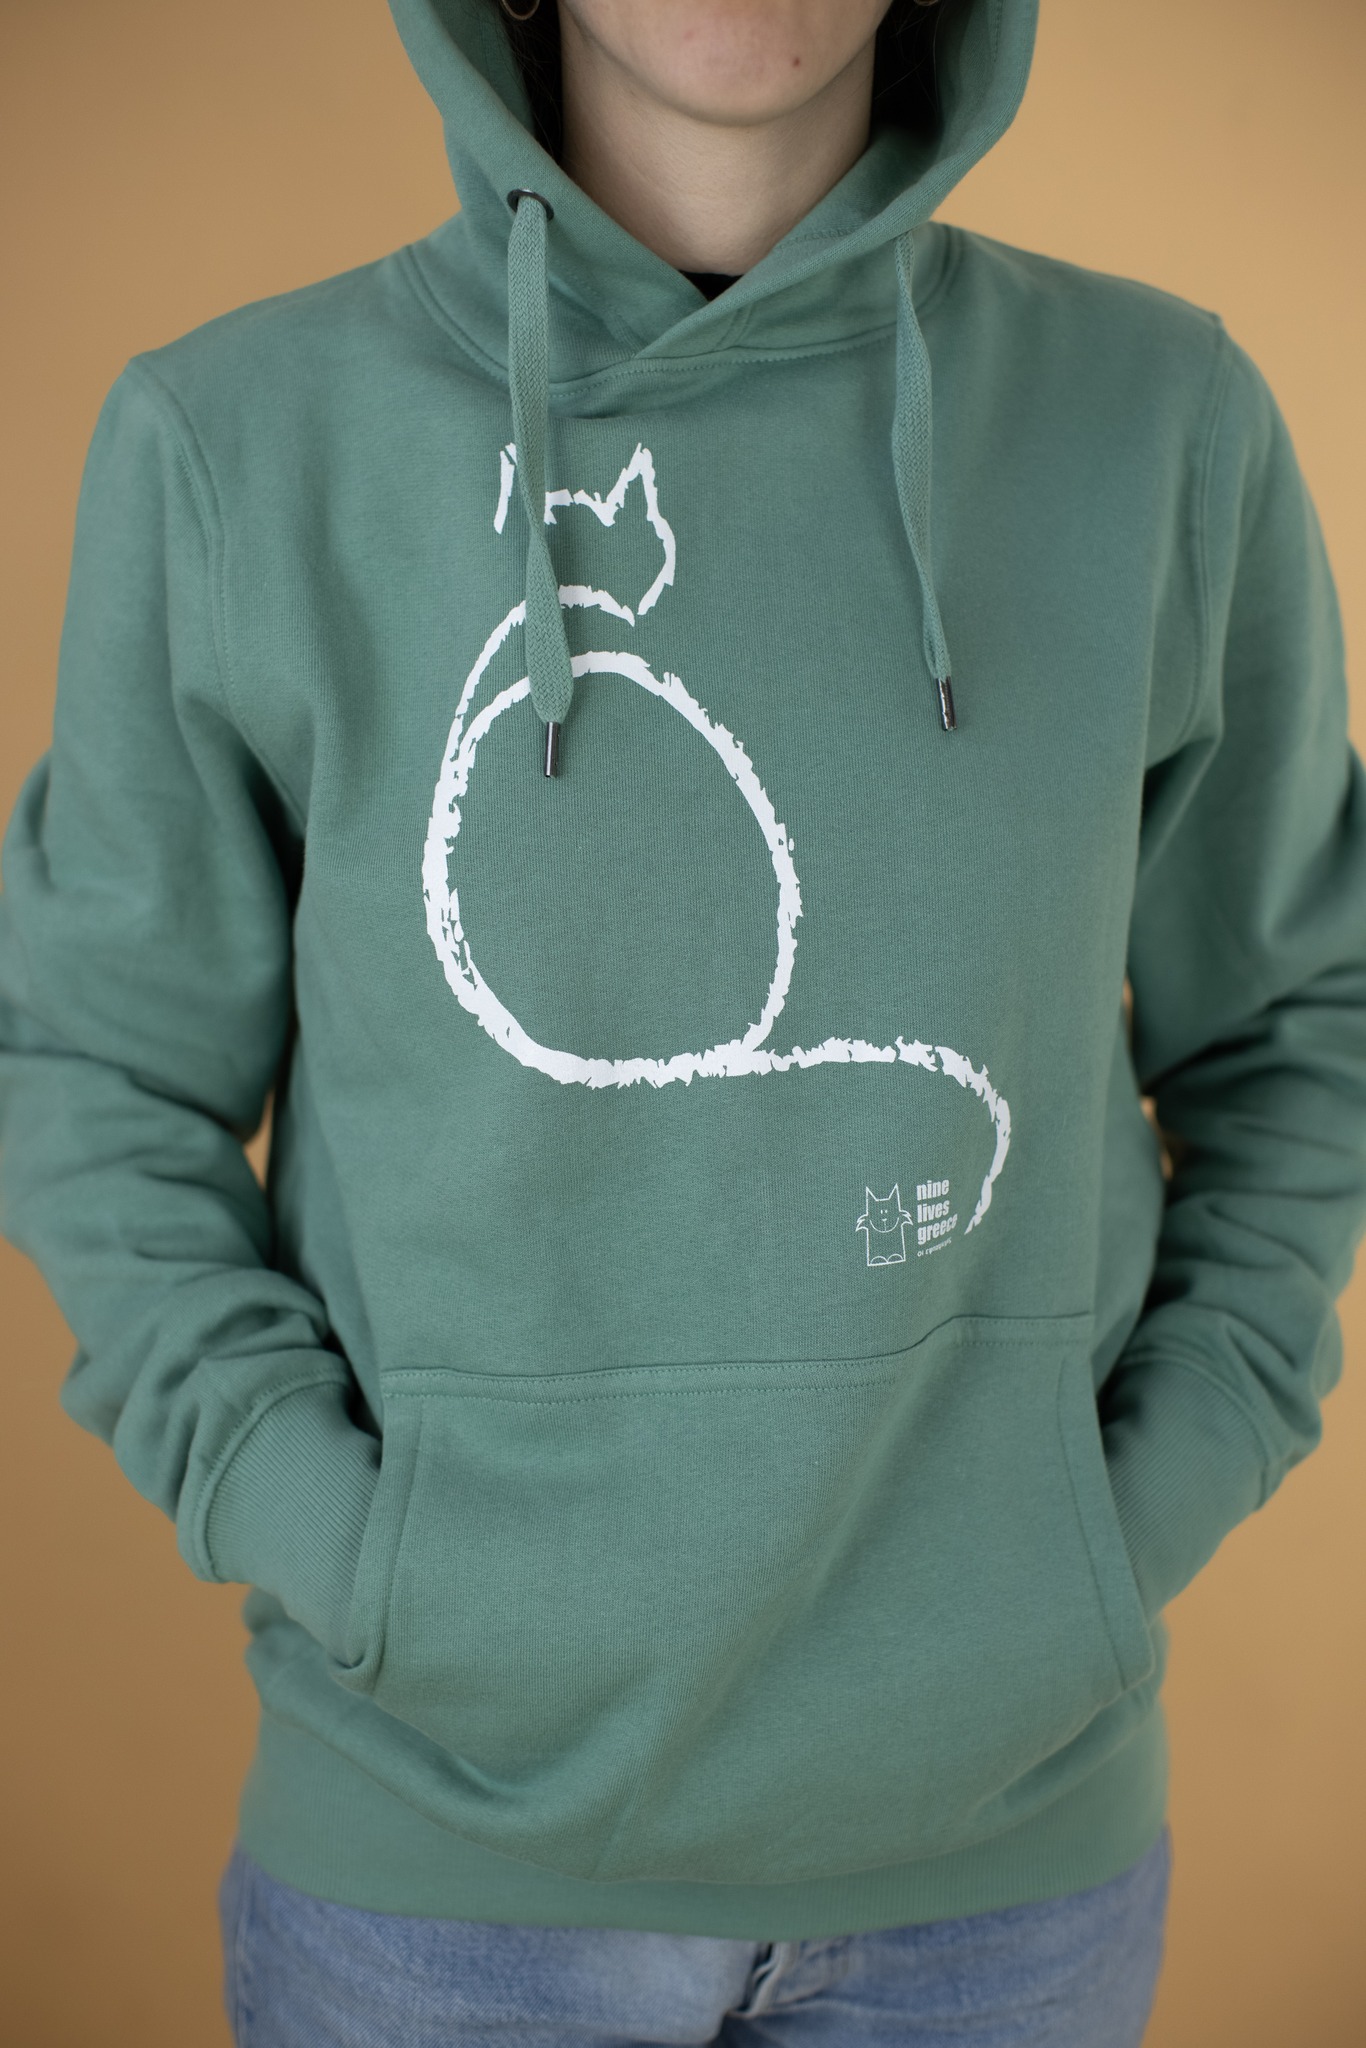 A sage green hoodie with a white sitting cat design.